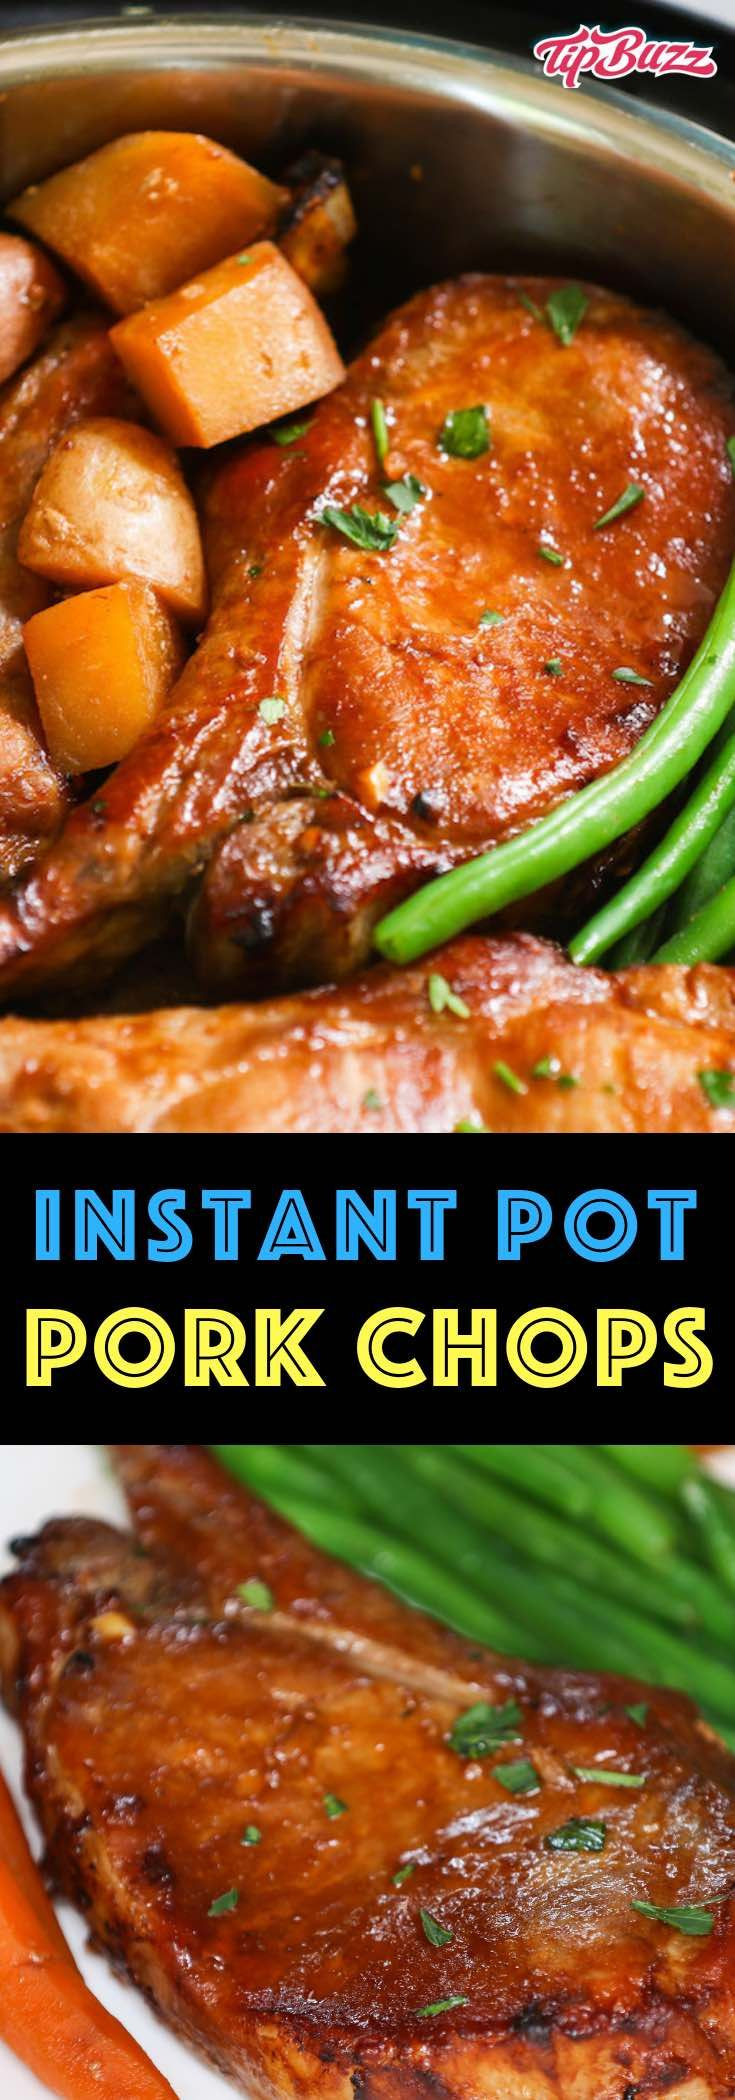 Frozen Pork Chops Pressure Cooker Recipe
 Instant Pot Pork Chops are juicy and full of flavor – they